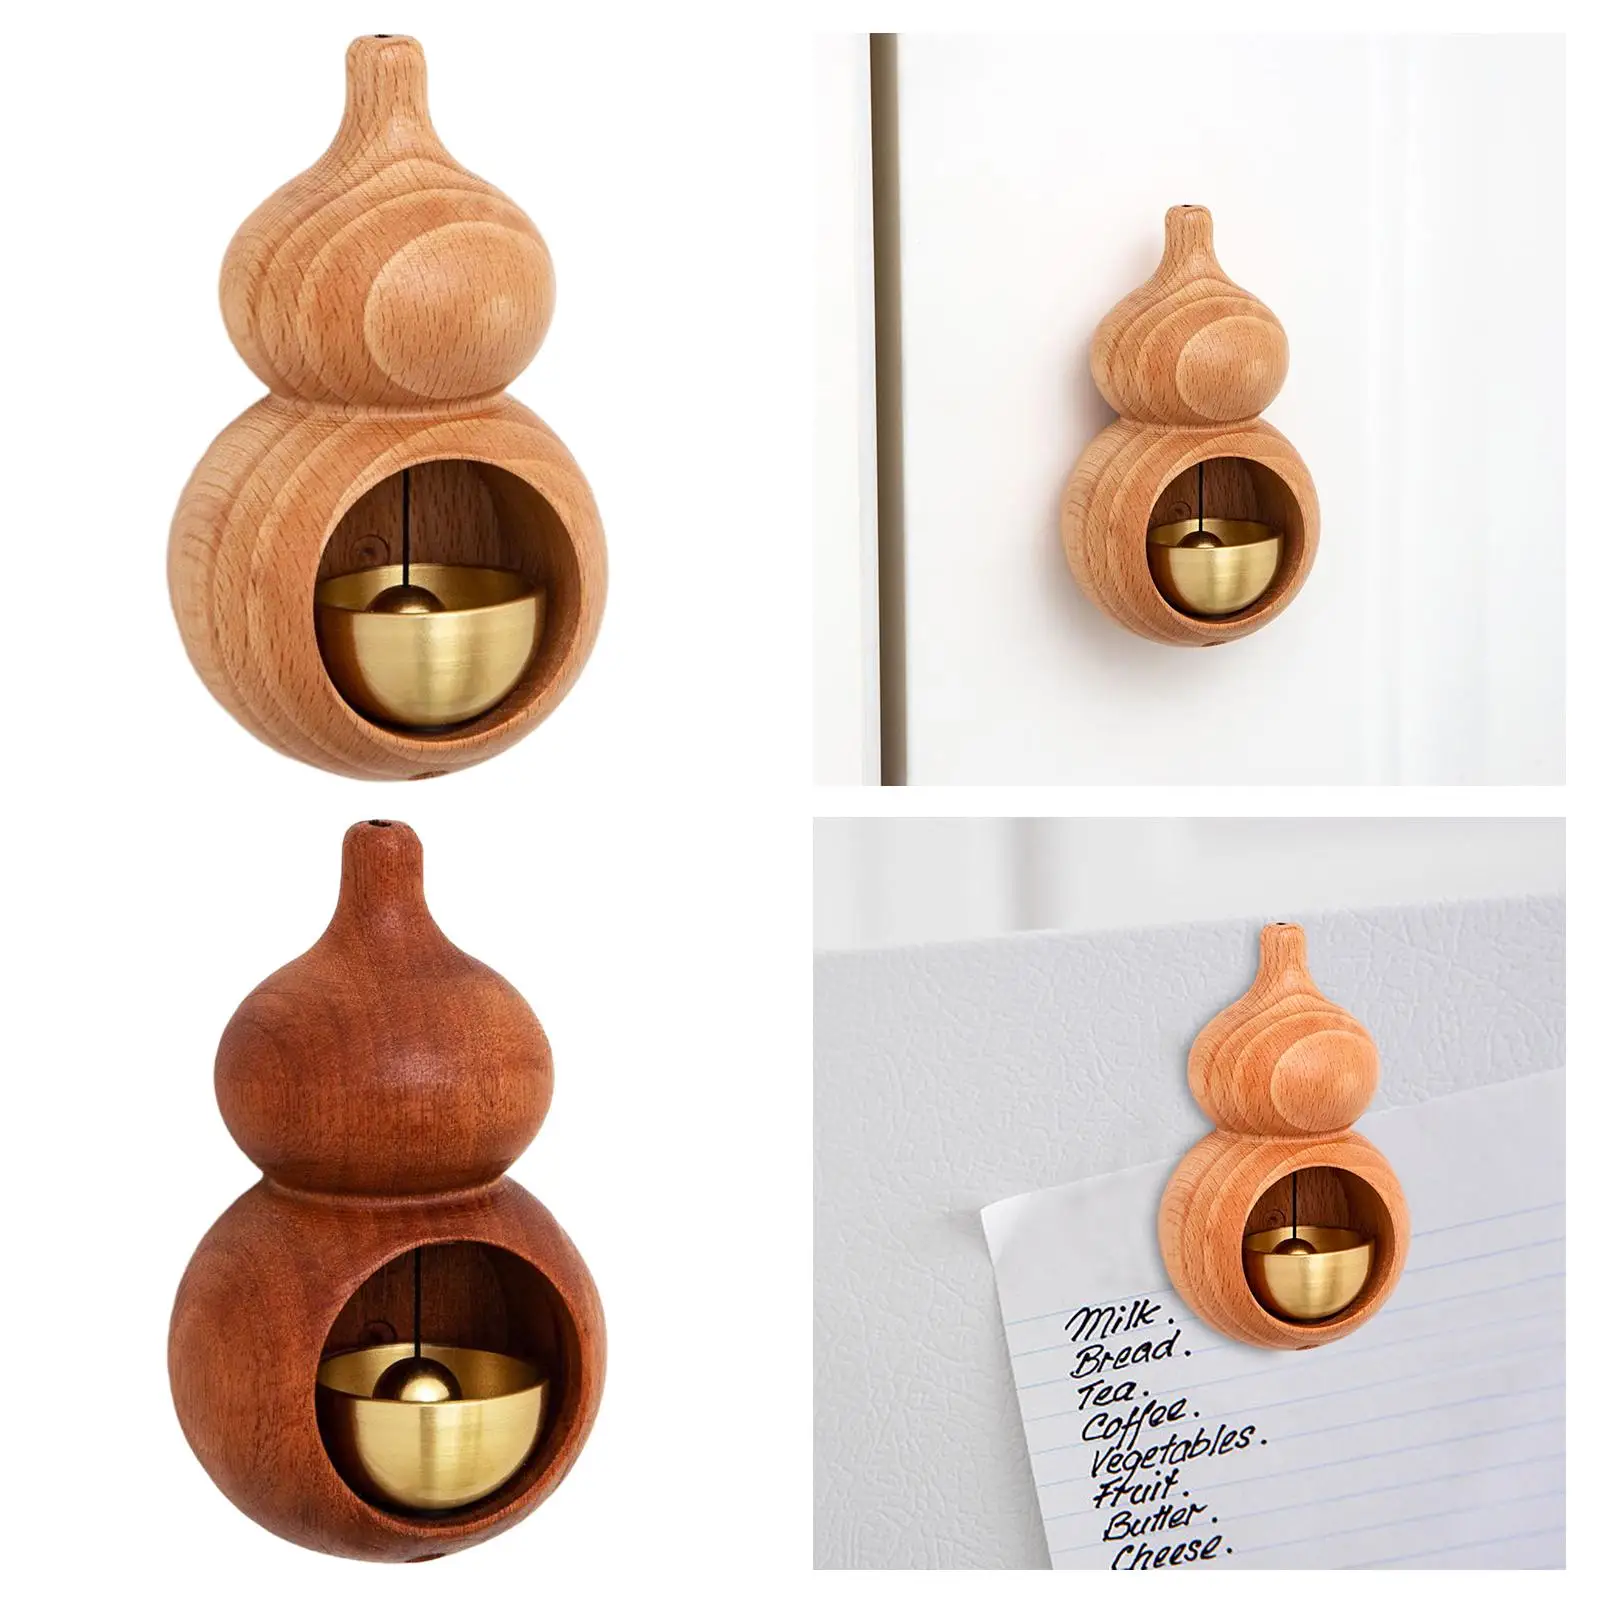 Shopkeepers Bell Lucky Gourd Gate Bell Chime Entry Doorbells Chime Wood Doorbells for Wardrobe Gate Entering Store Refrigerator